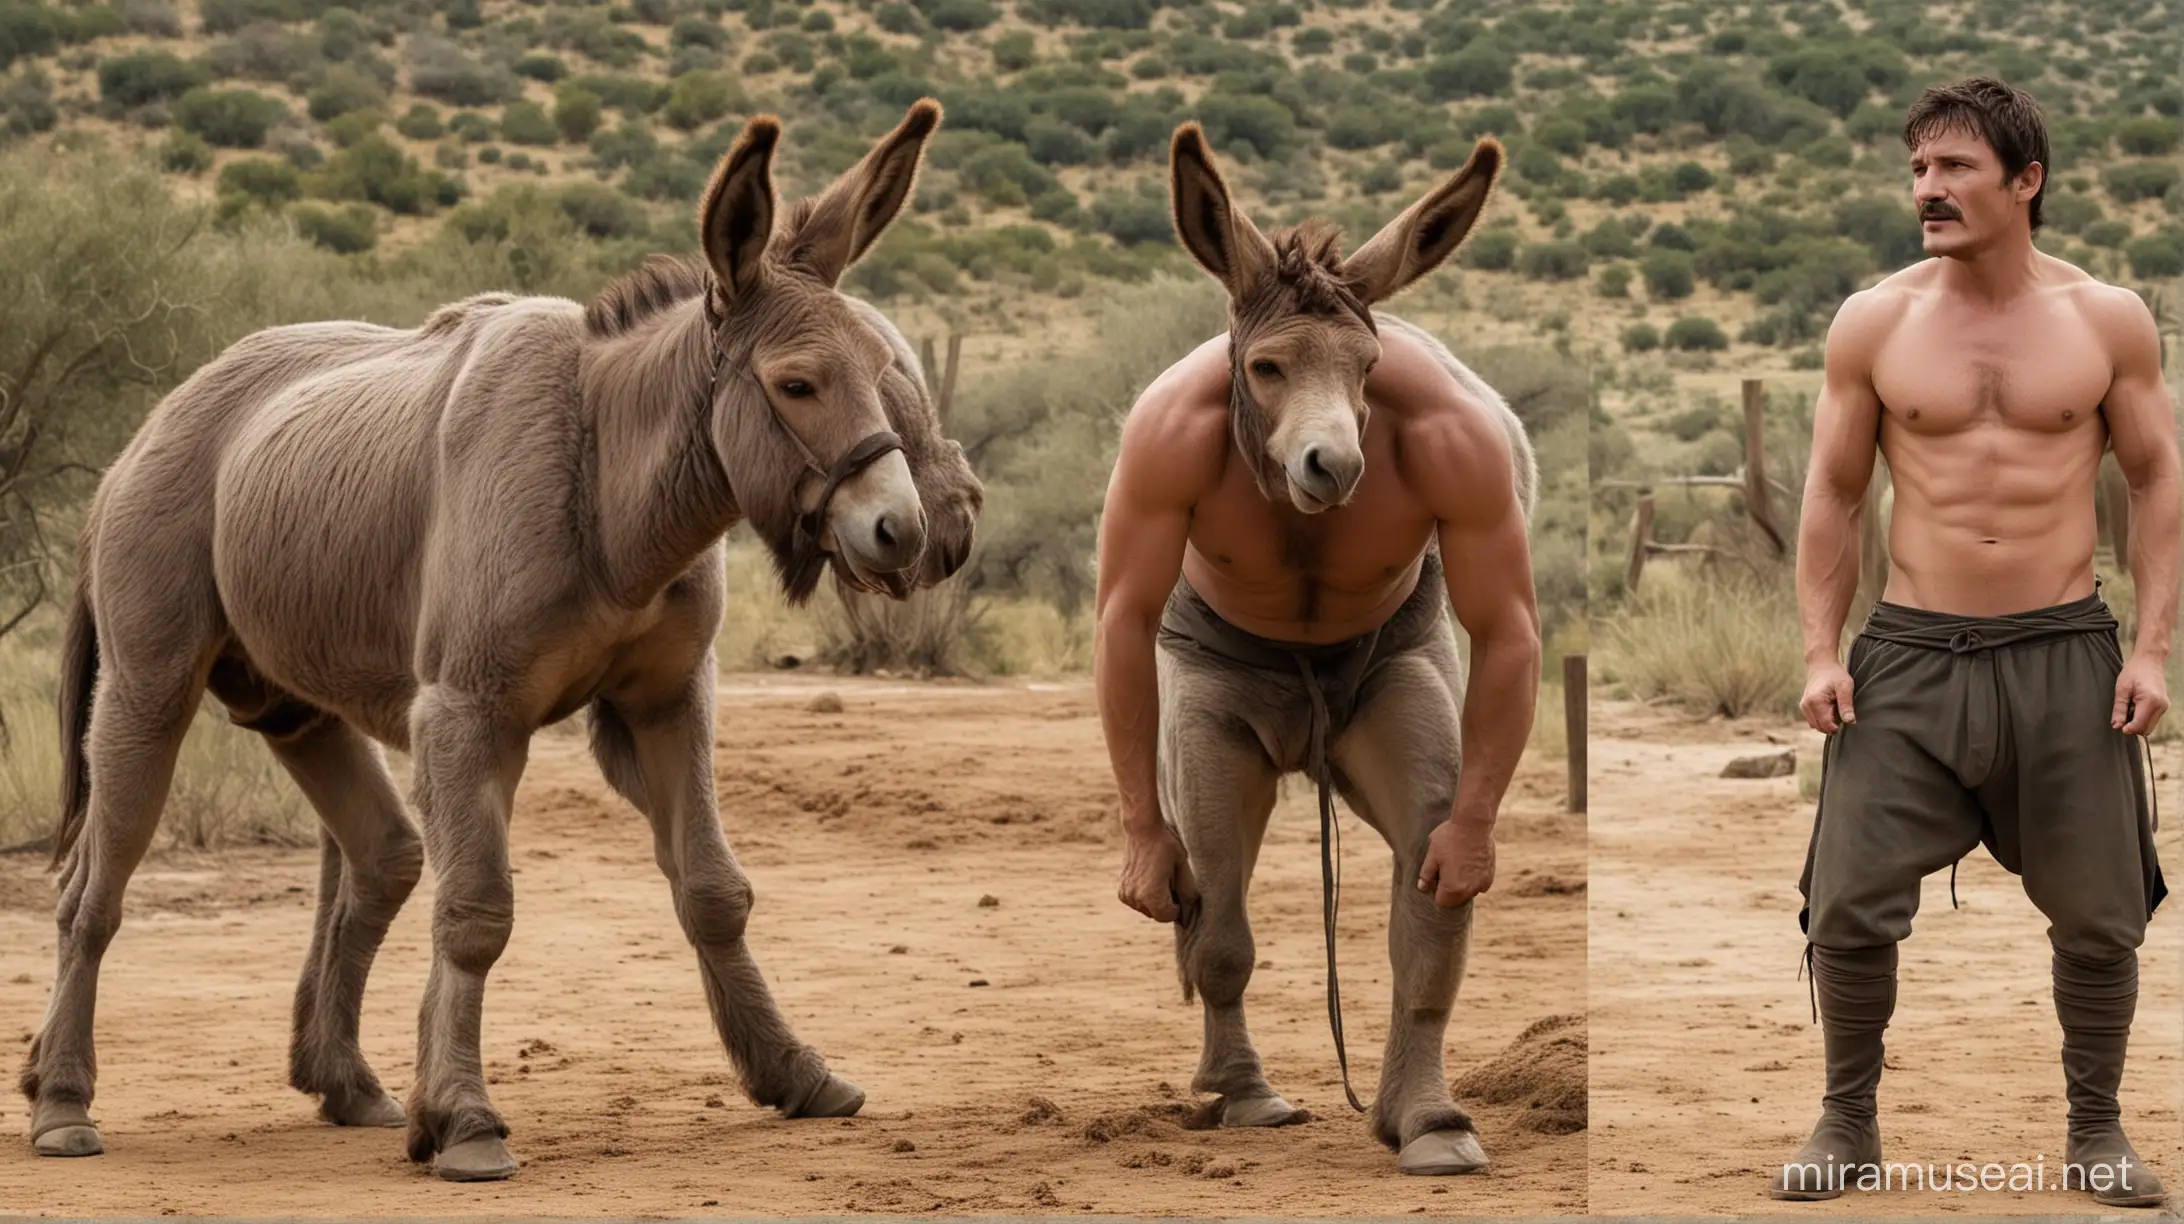 Pedro Pascal Transformation Actor Metamorphosing into Donkey with Human Head